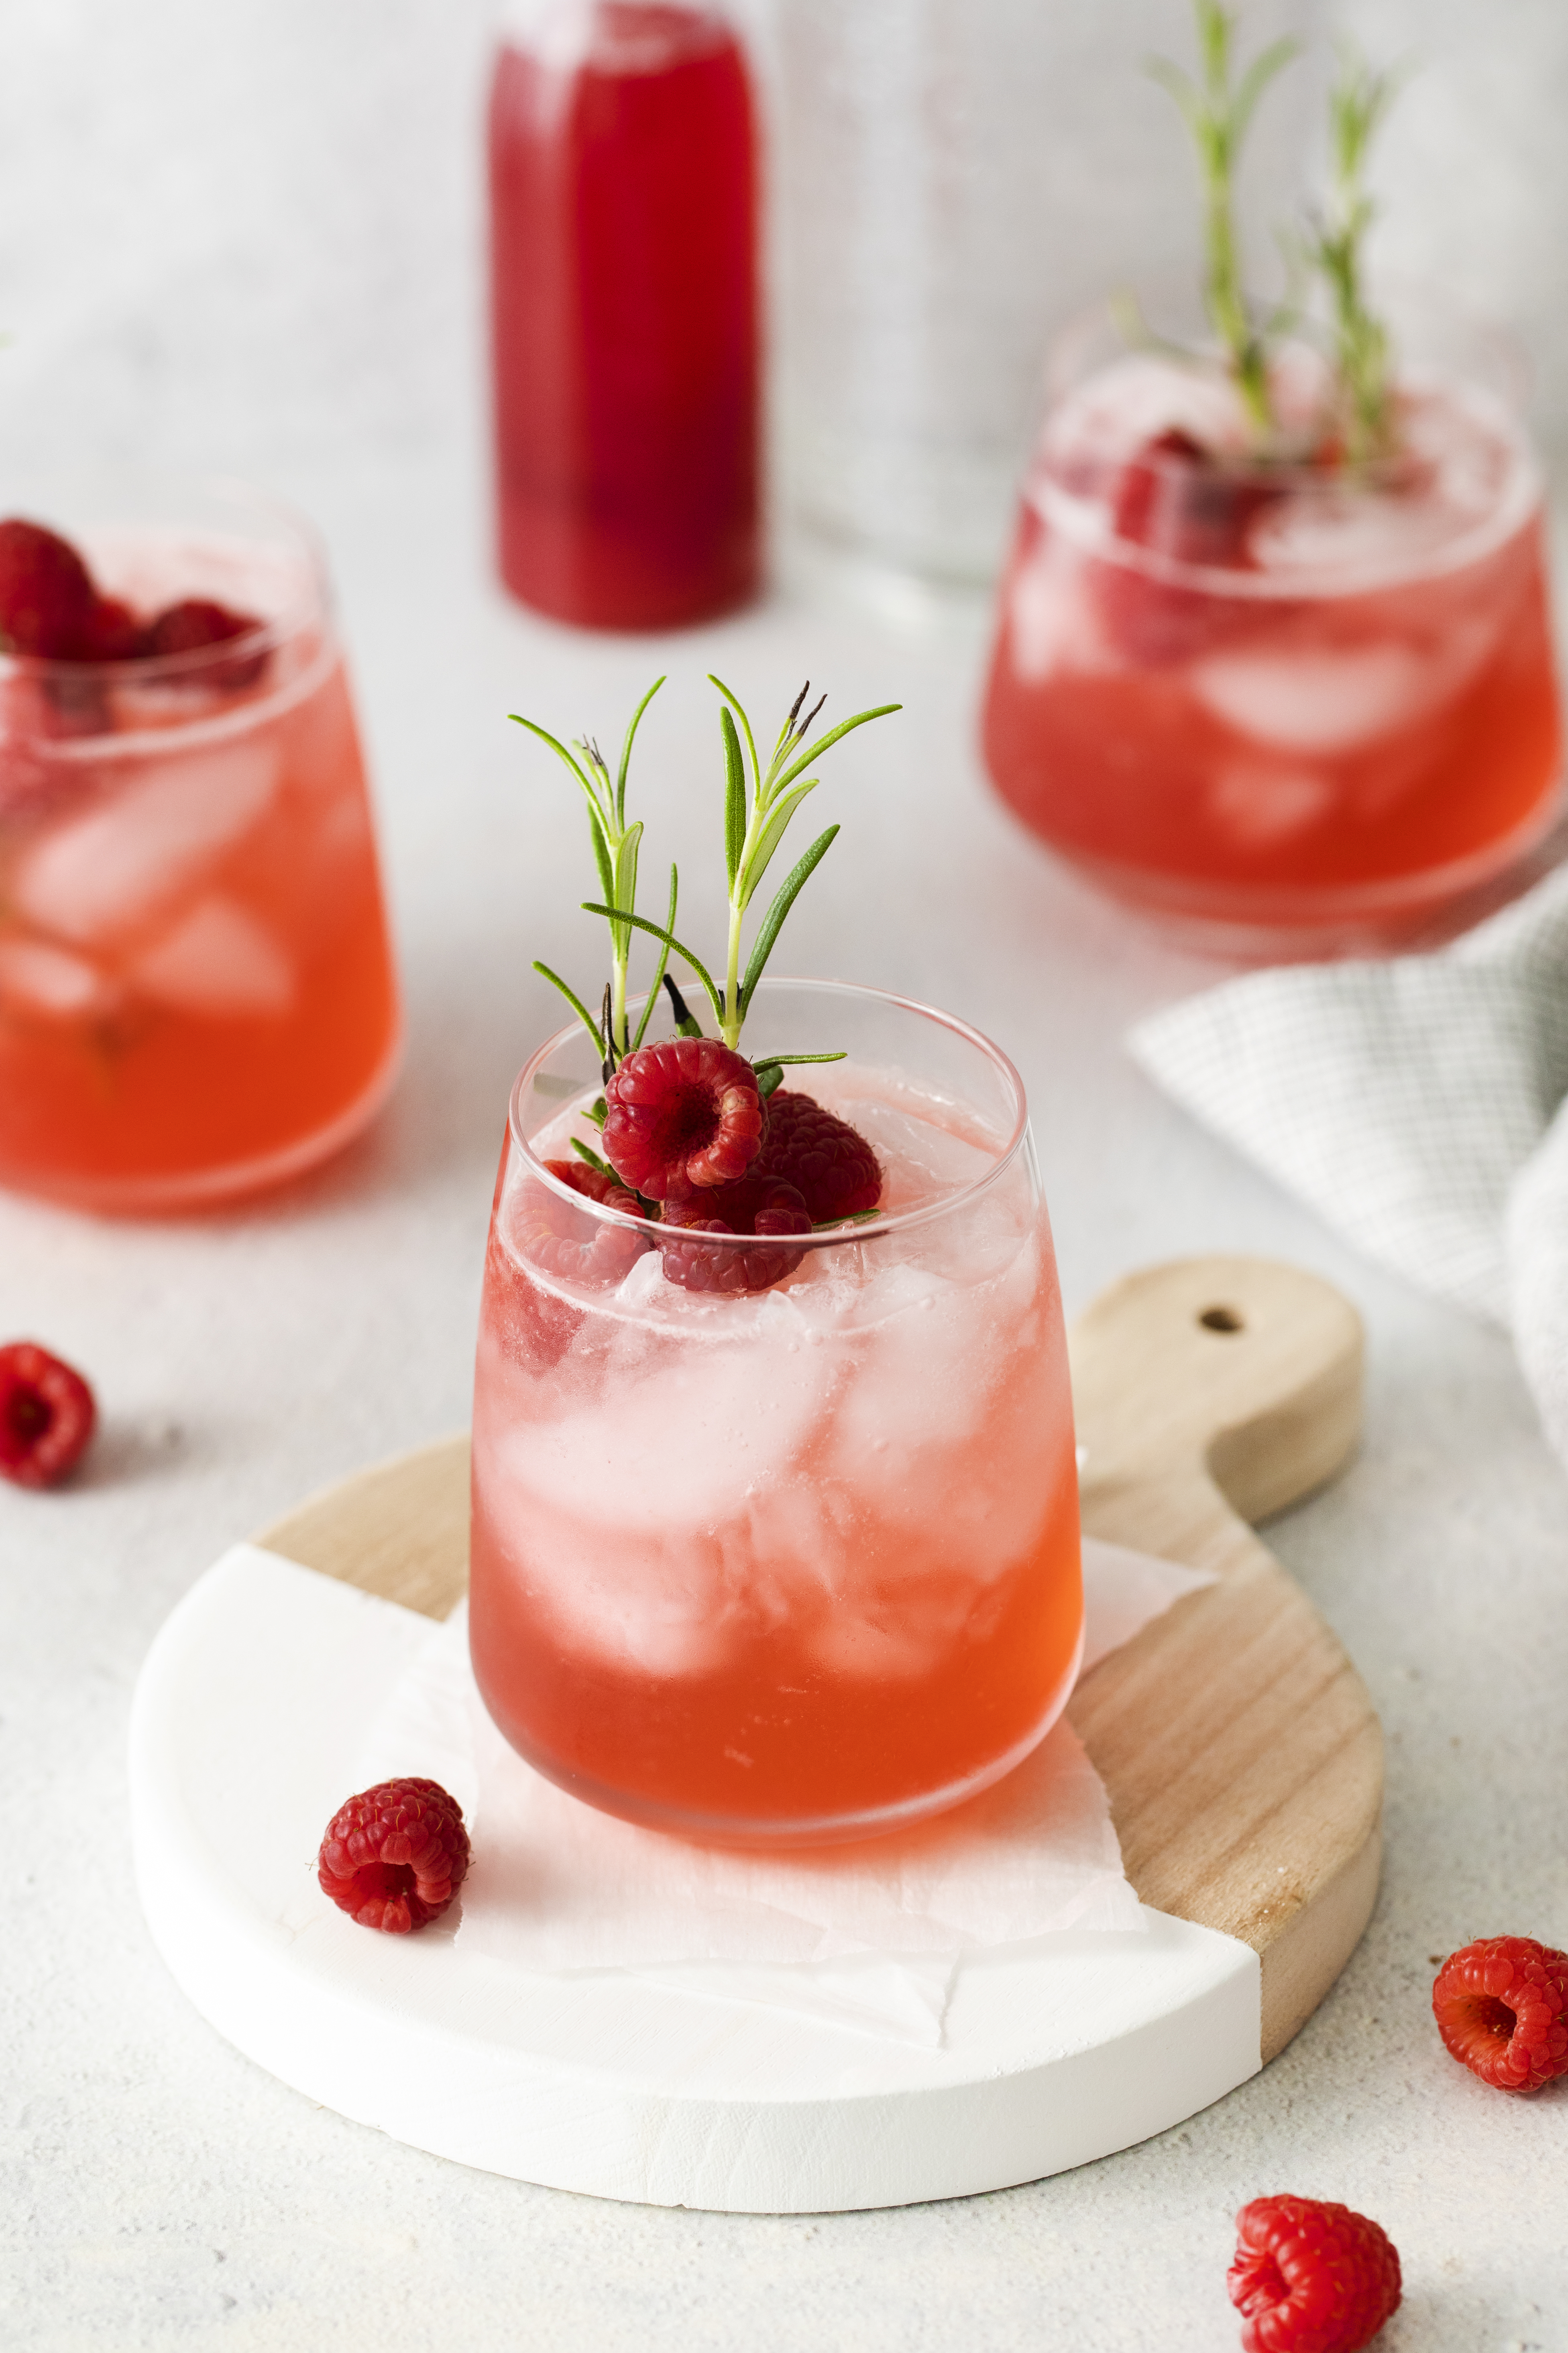 This Raspberry Gin Cocktail is the perfect sweet and fruity drink for Valentine’s day. This refreshing cocktail is made with two types of liquor, fresh lemon, and a refined sugar-free raspberry simple syrup!